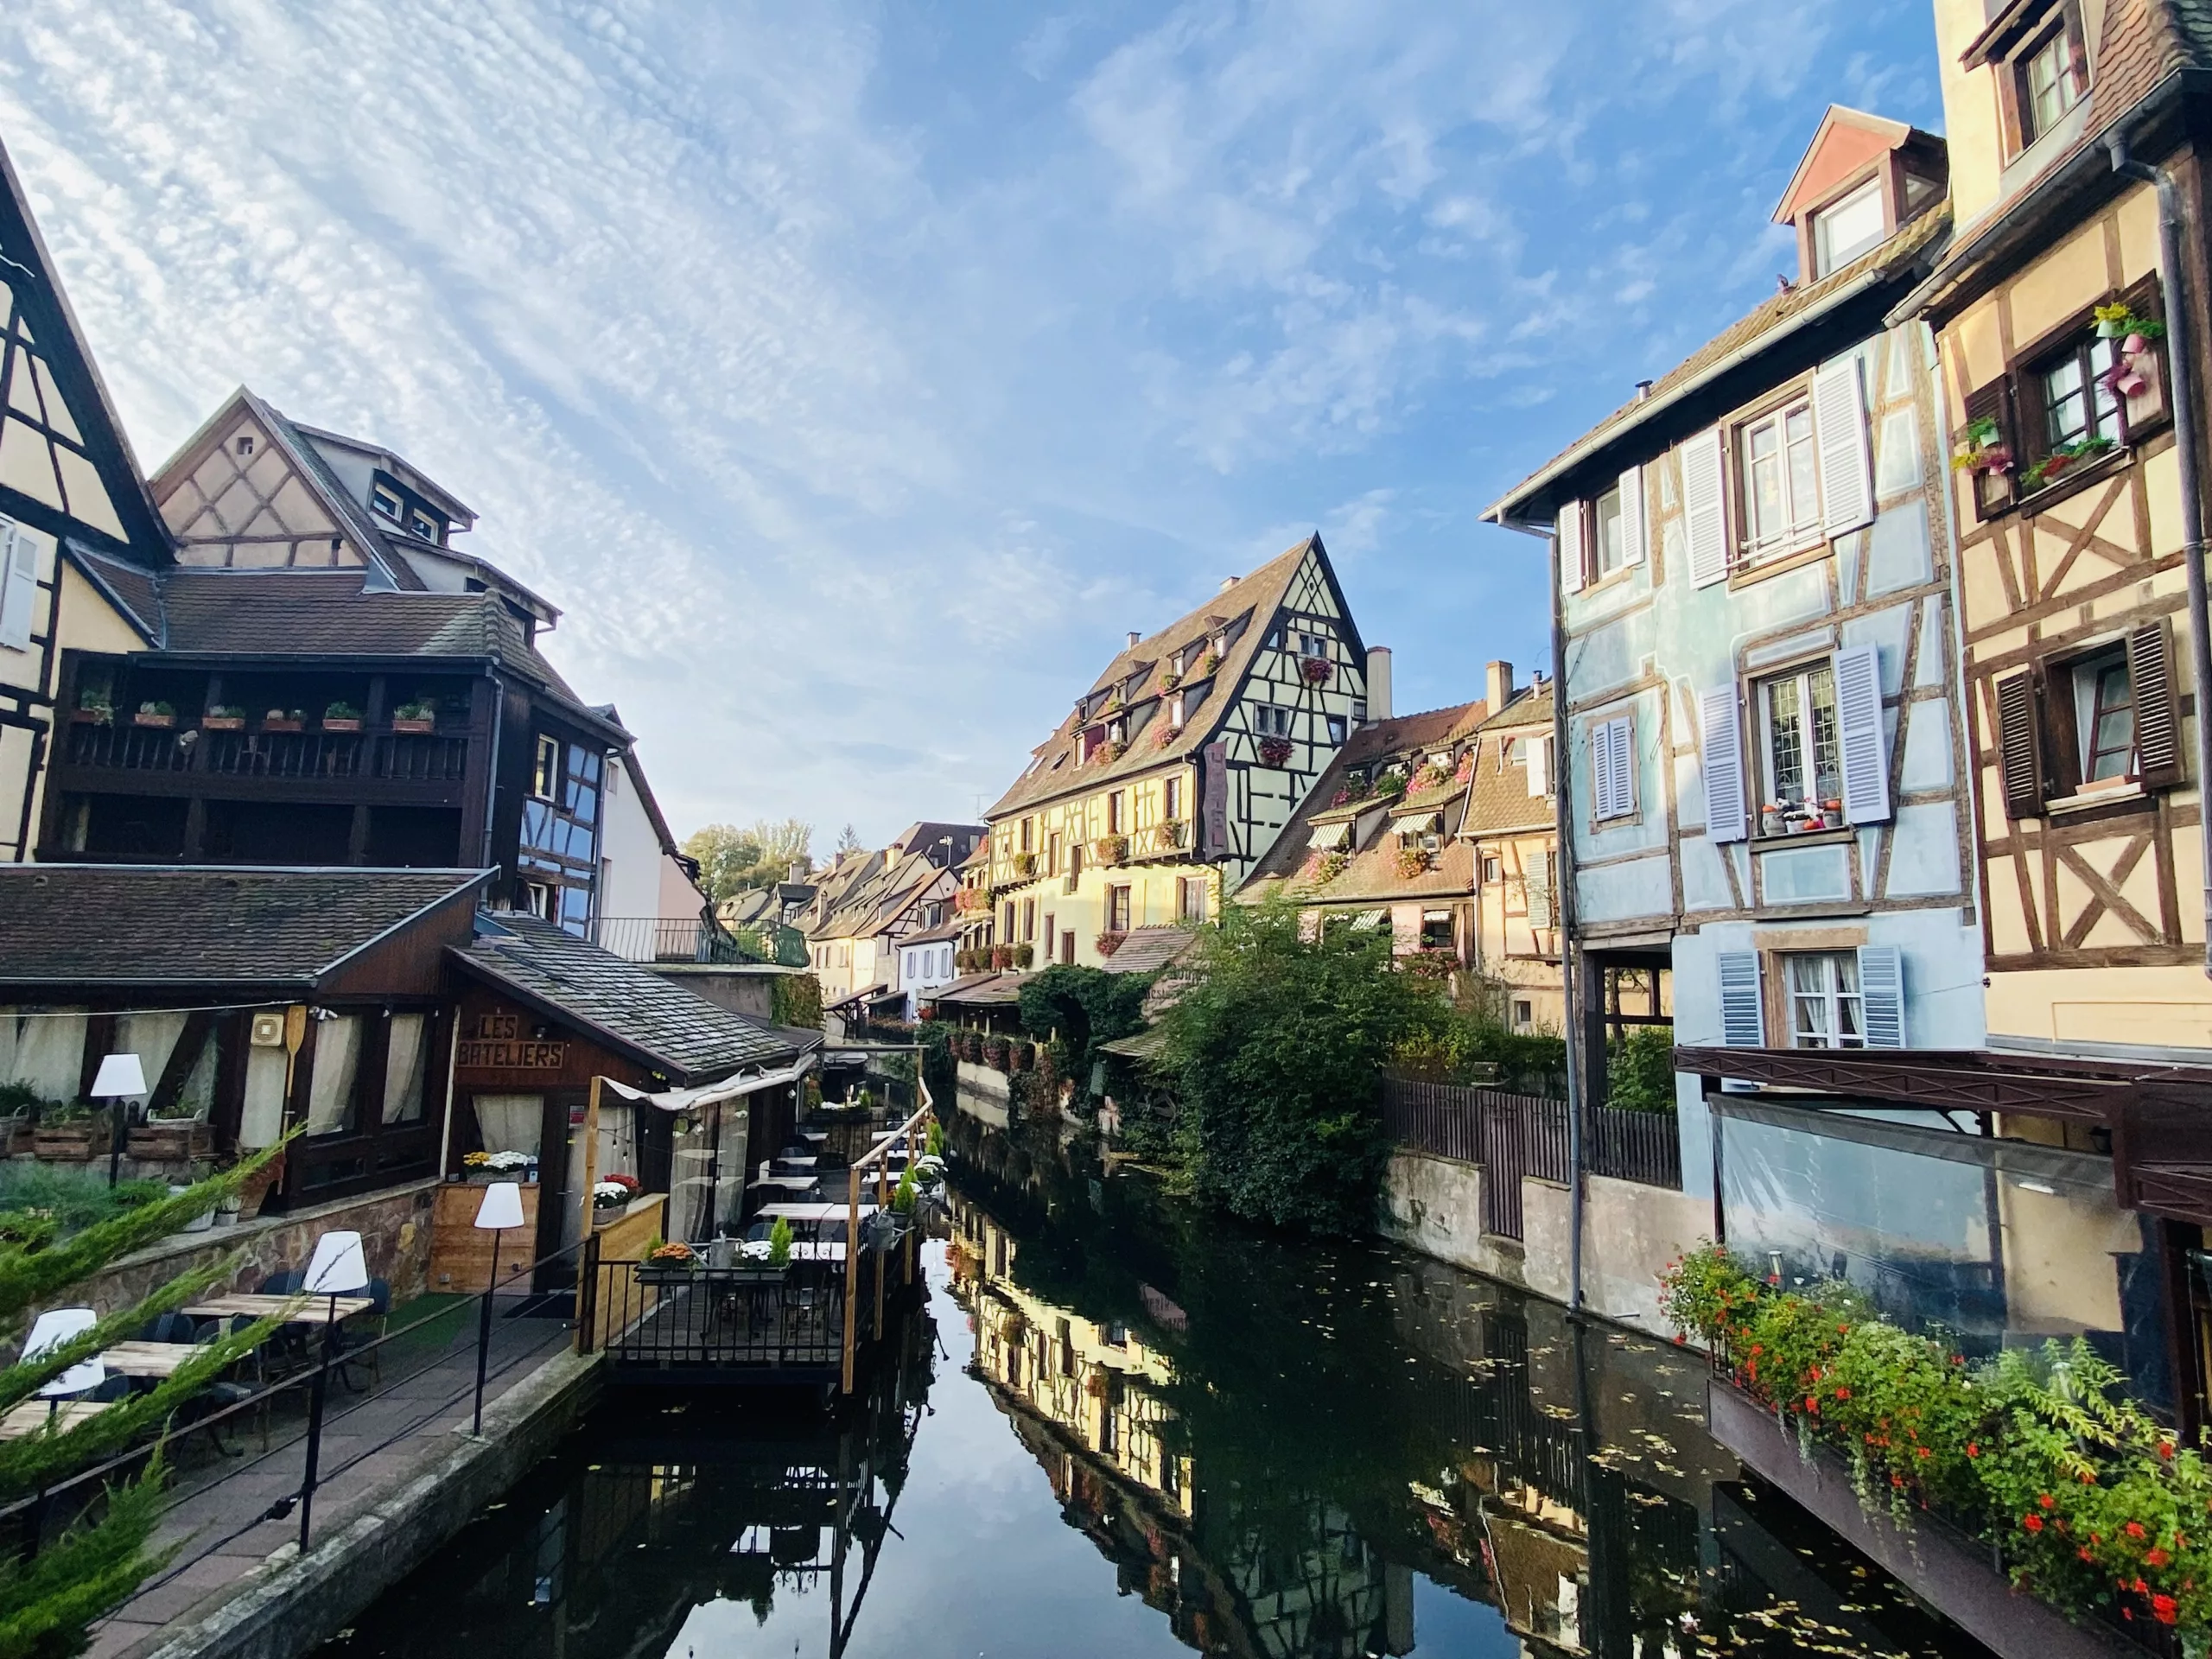 Visiting the Fairytale Village of Colmar, France